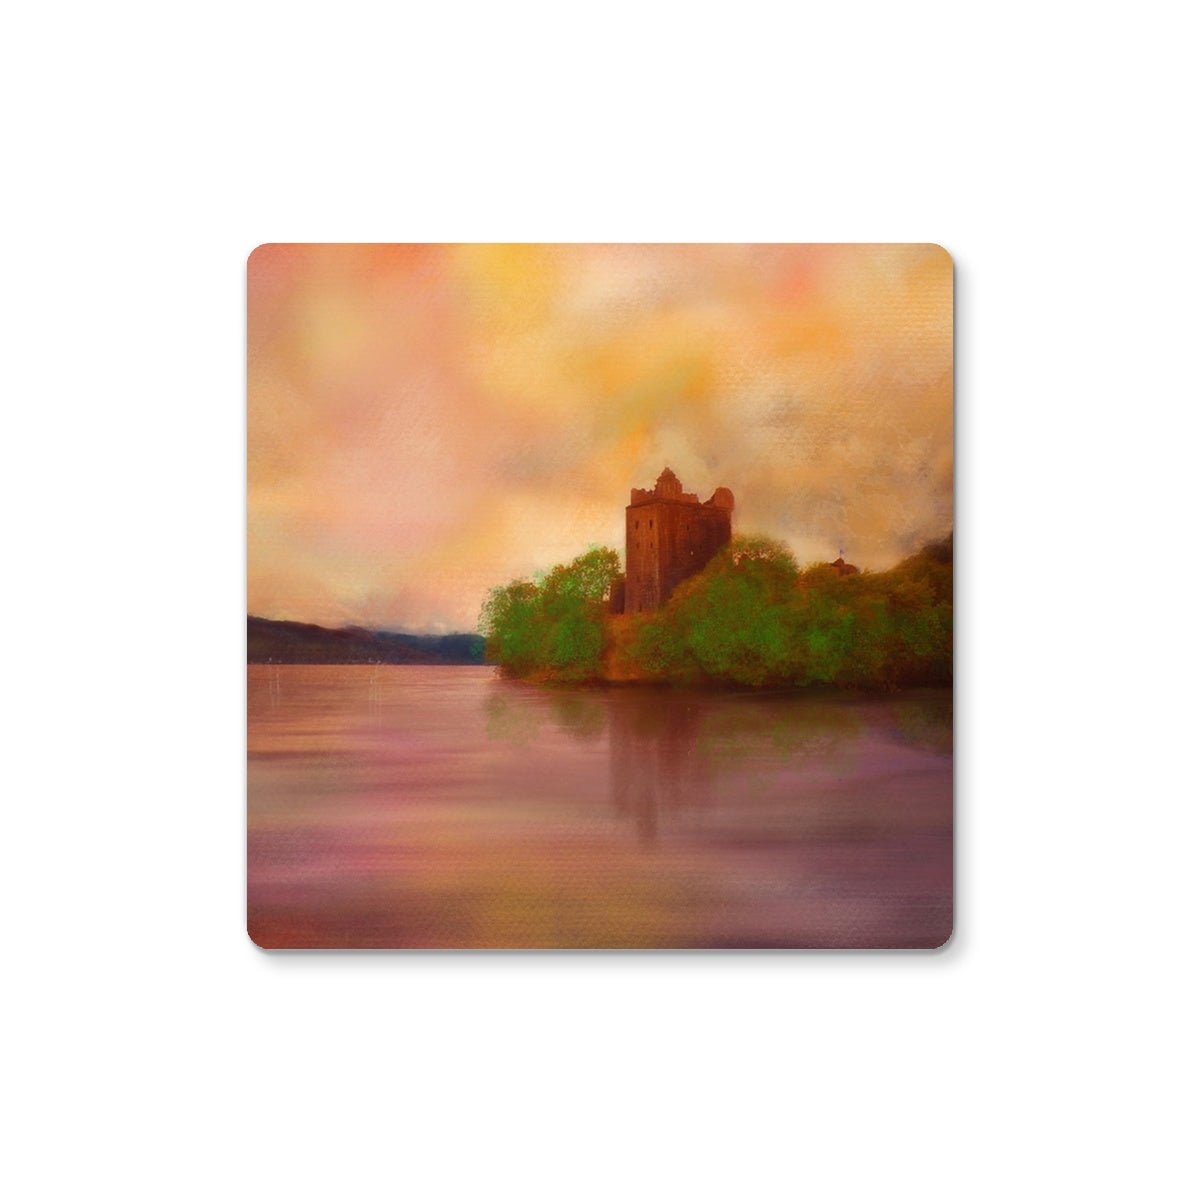 Urquhart Castle Art Gifts Coaster-Coasters-Scottish Castles Art Gallery-6 Coasters-Paintings, Prints, Homeware, Art Gifts From Scotland By Scottish Artist Kevin Hunter